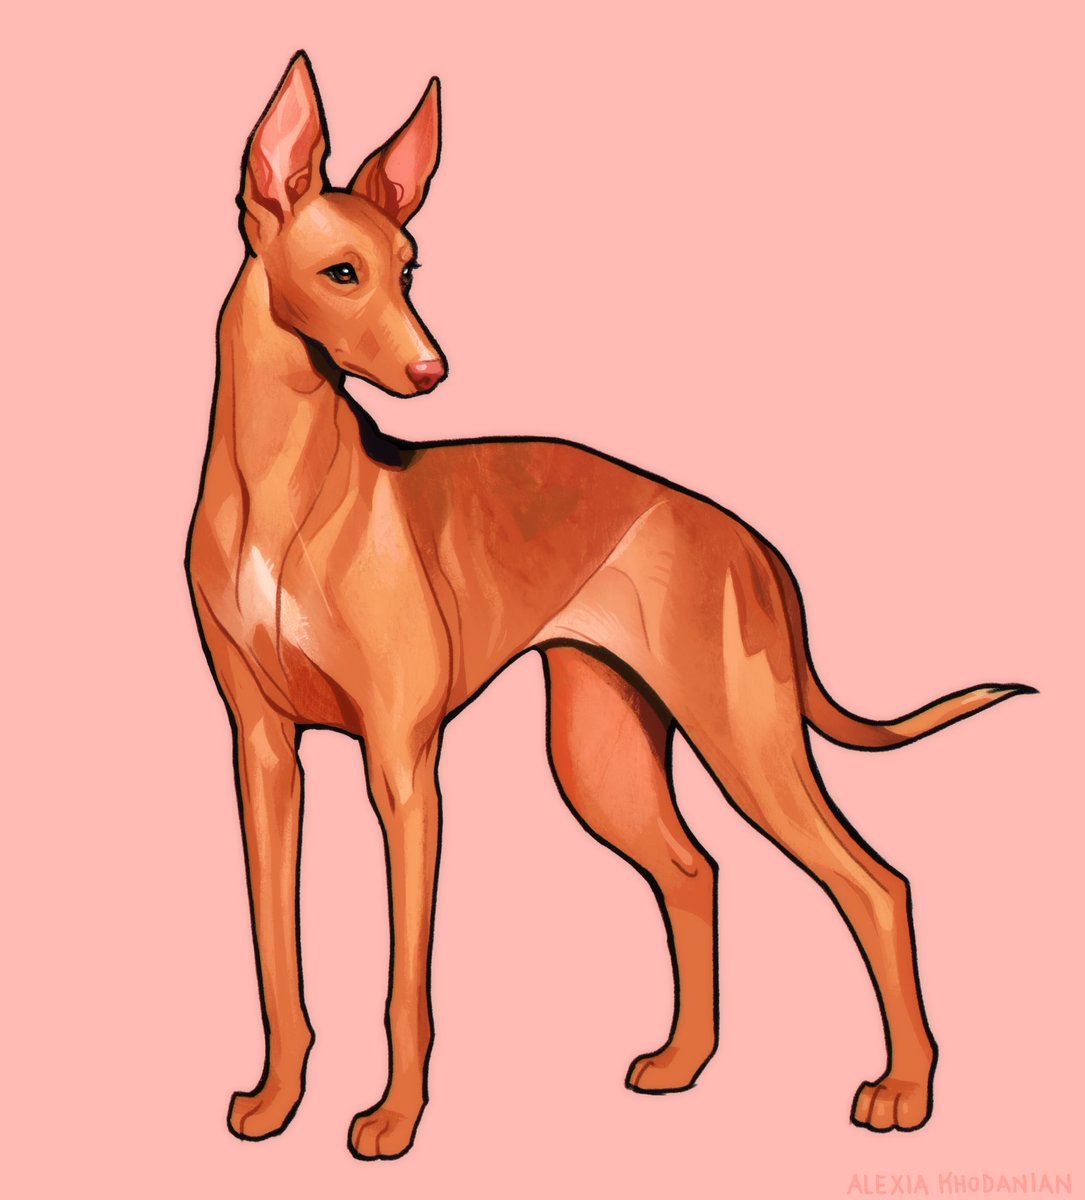  #doggust day 25: Pharaoh Hound! I was missing my signature black outlines so i tried mixing up the style a bit with this one :^)